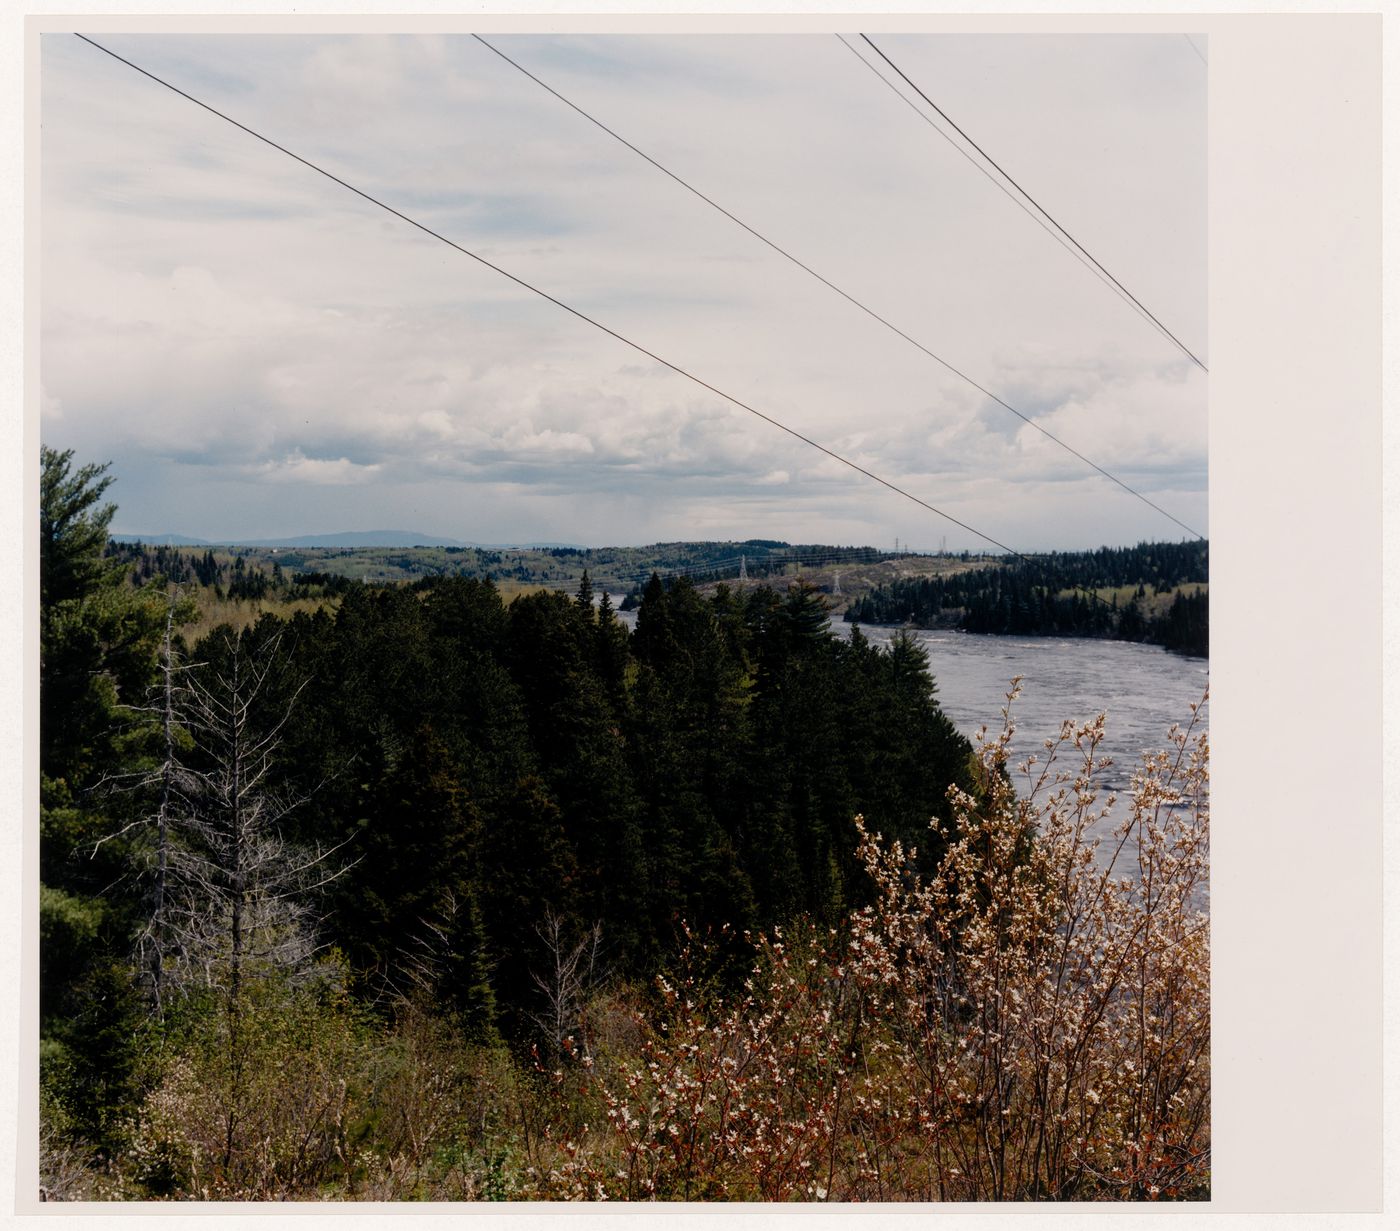 Section 4 of 4 of Panorama of the Shipshaw hydro-electric site, looking northeast, showing pylon, dam, power station, and Saguenay River